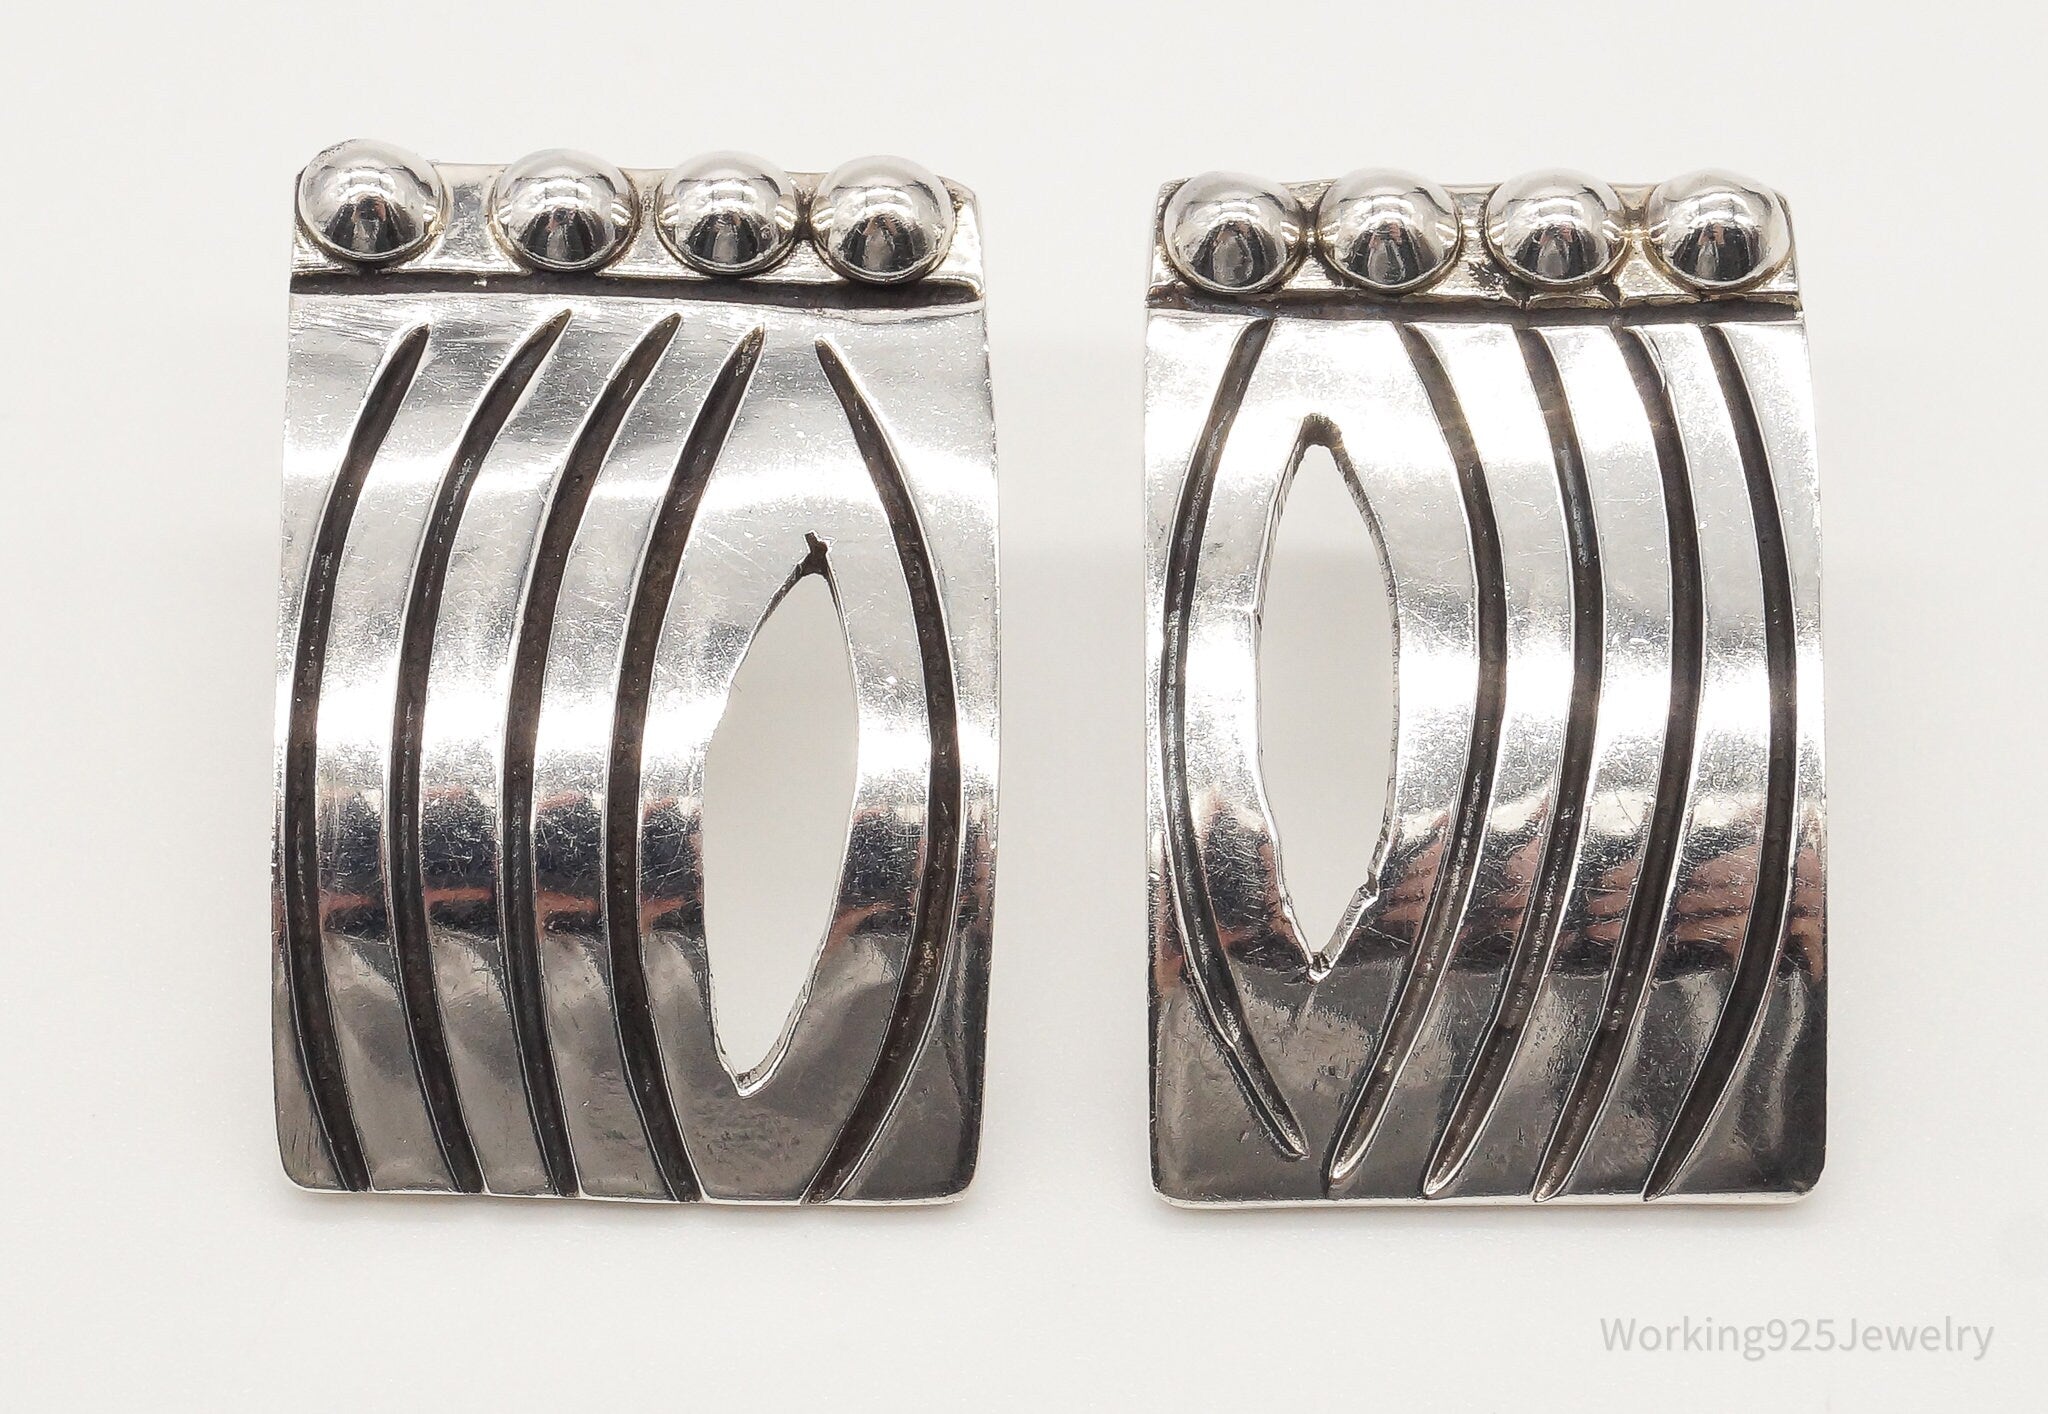 RARE Vintage Mexico Modernist Melesio Villarreal Sterling Silver Earrings